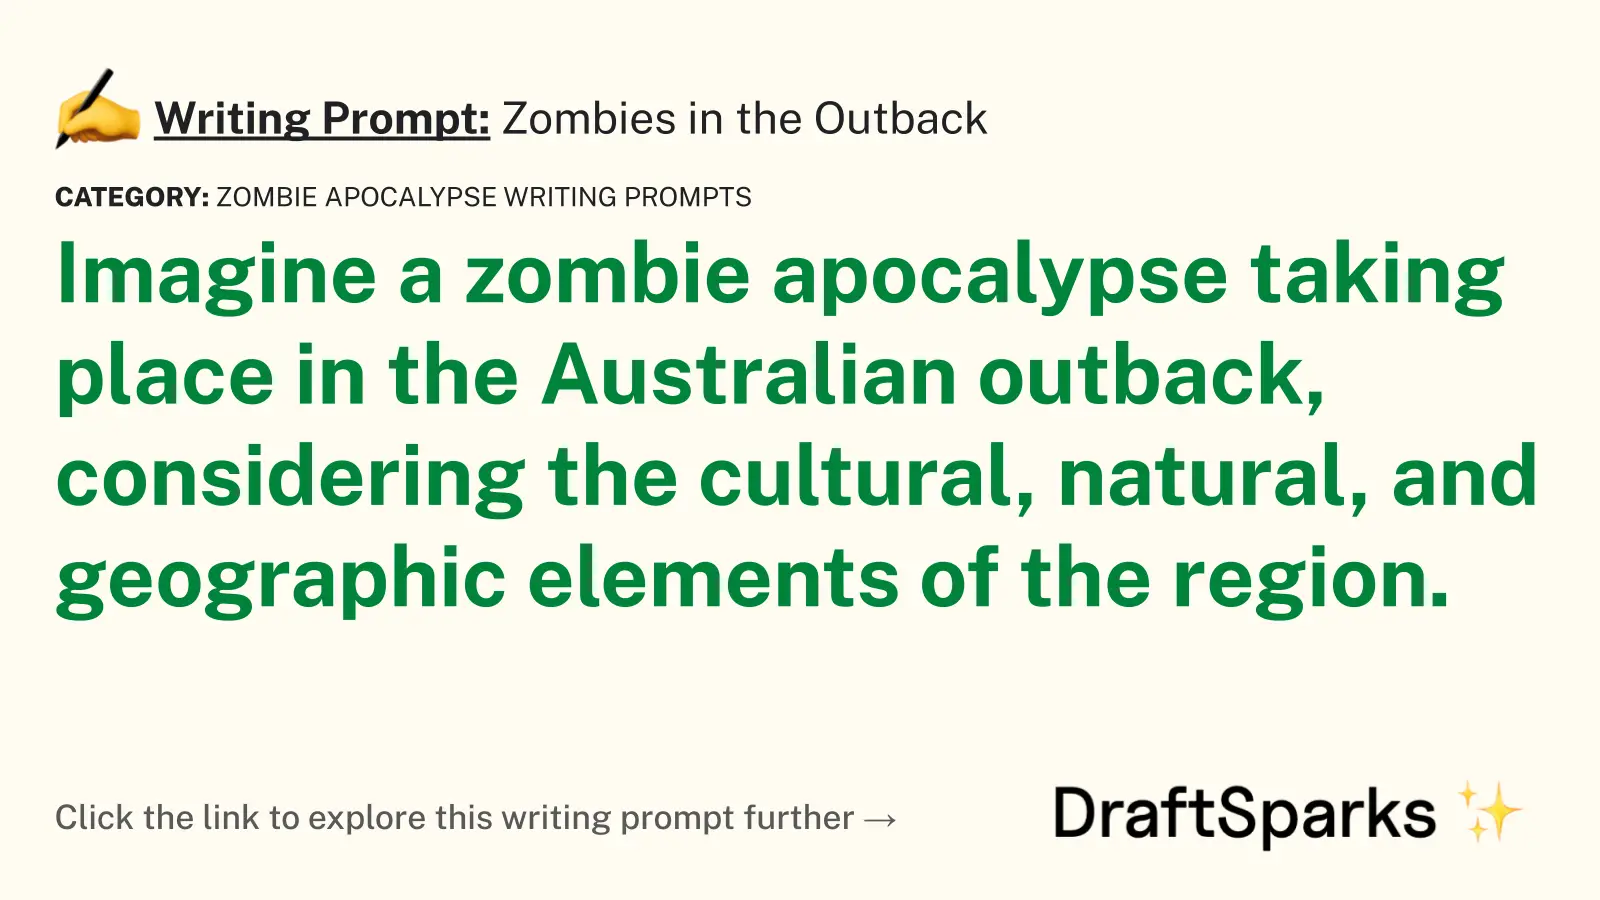 Zombies in the Outback